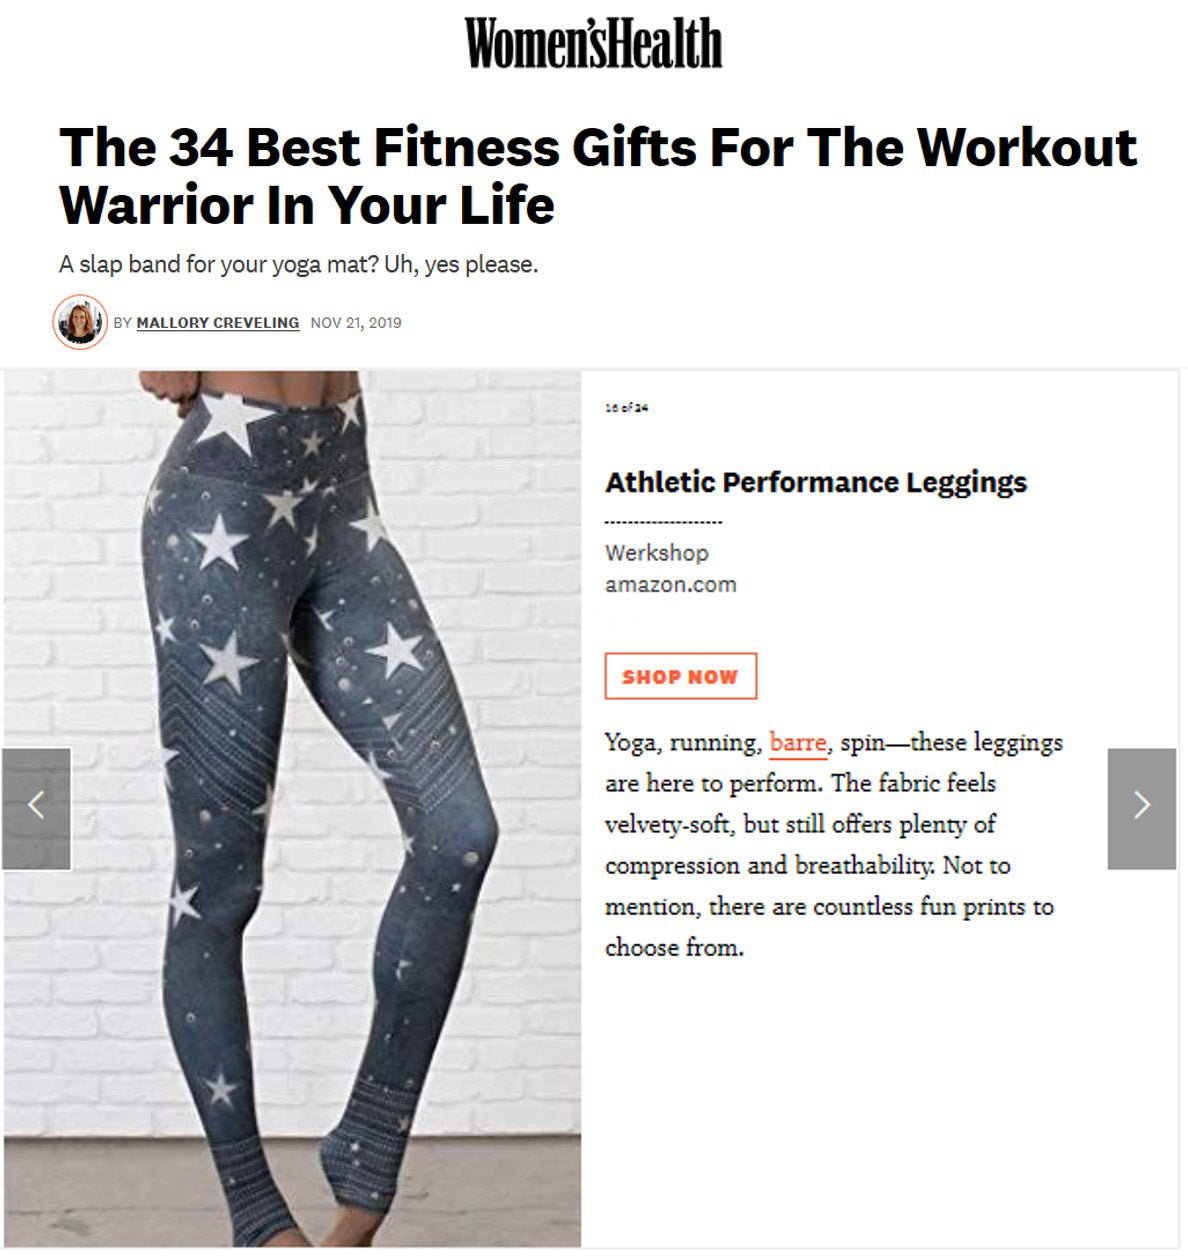 Best fitness gifts for the workout warrior in your life: featuring WERKSHOP Leatherwerk Stars